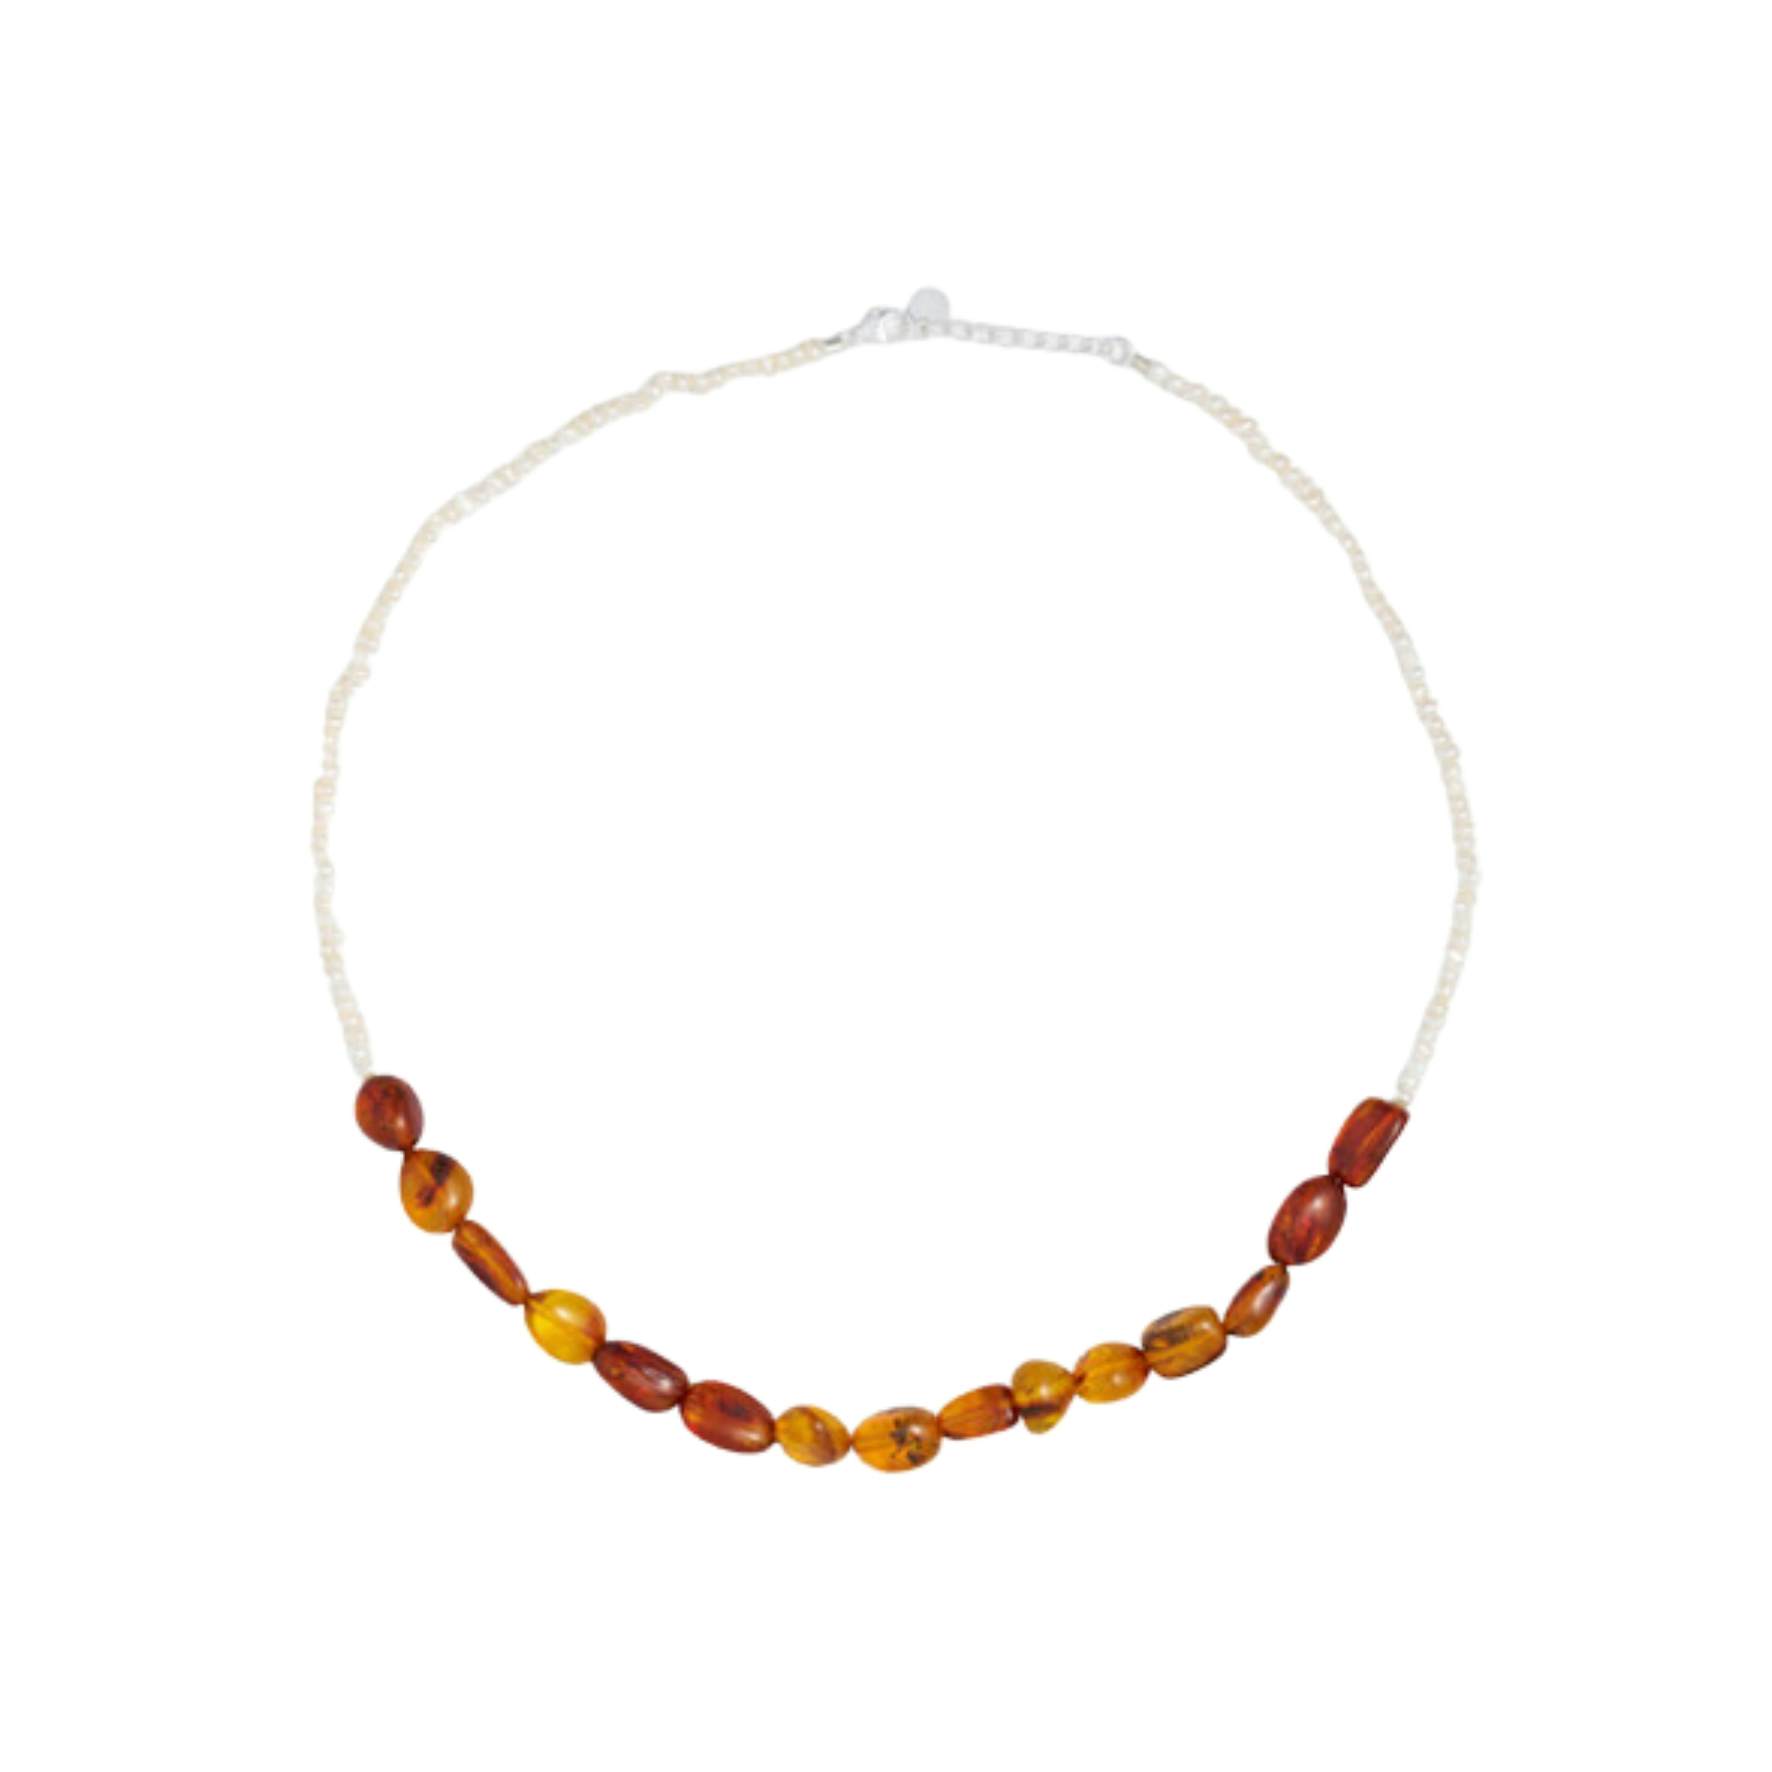 Curious Necklace from Sorelle Jewellery in Goldplated-Silver Sterling 925